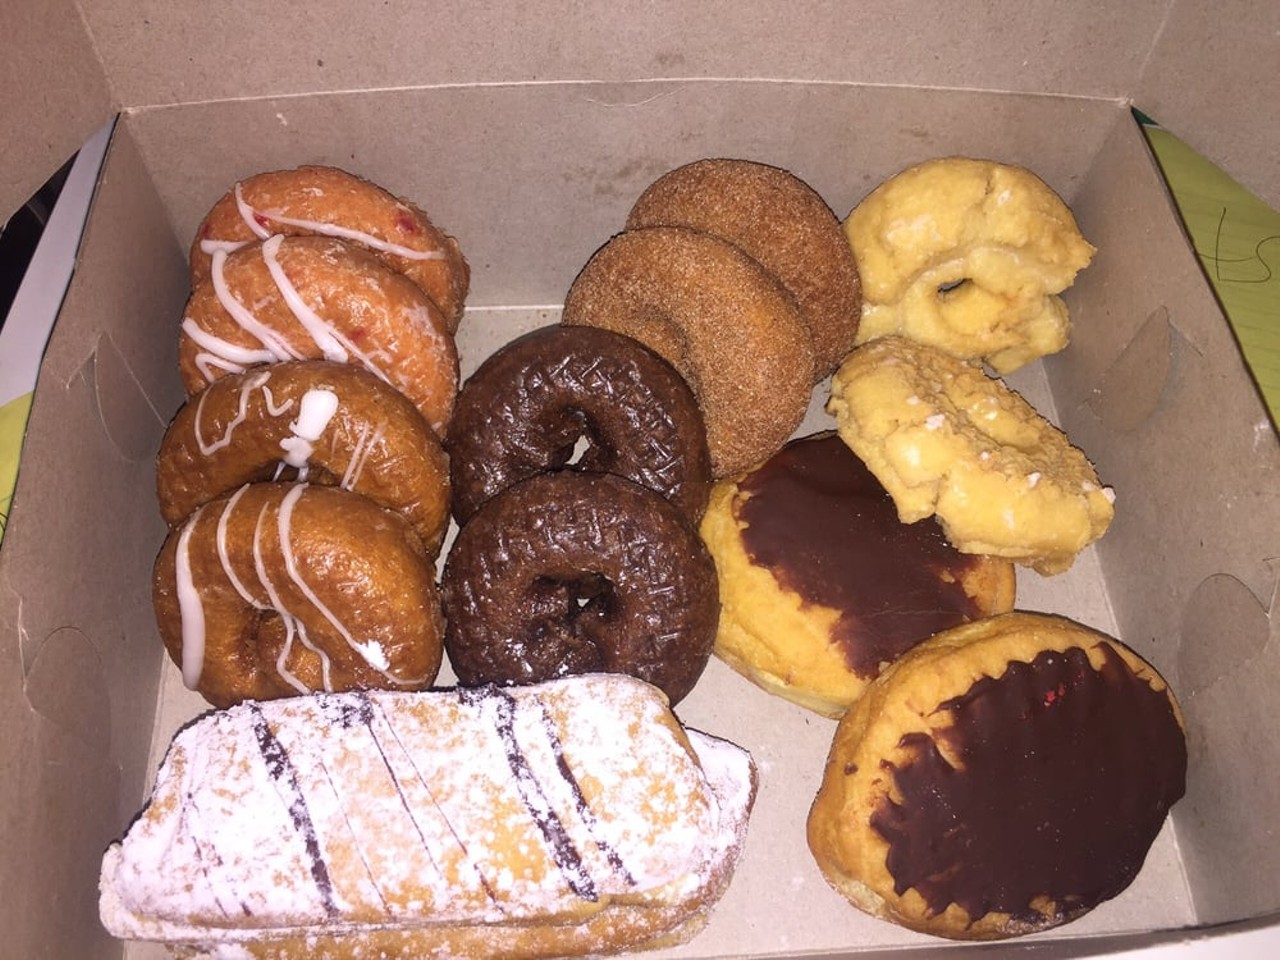  Willie's Donuts
Location: 23055 21 Mile Rd, Macomb
Hours: Mon-Sat 4am-1pm, Sun 5am-1pm